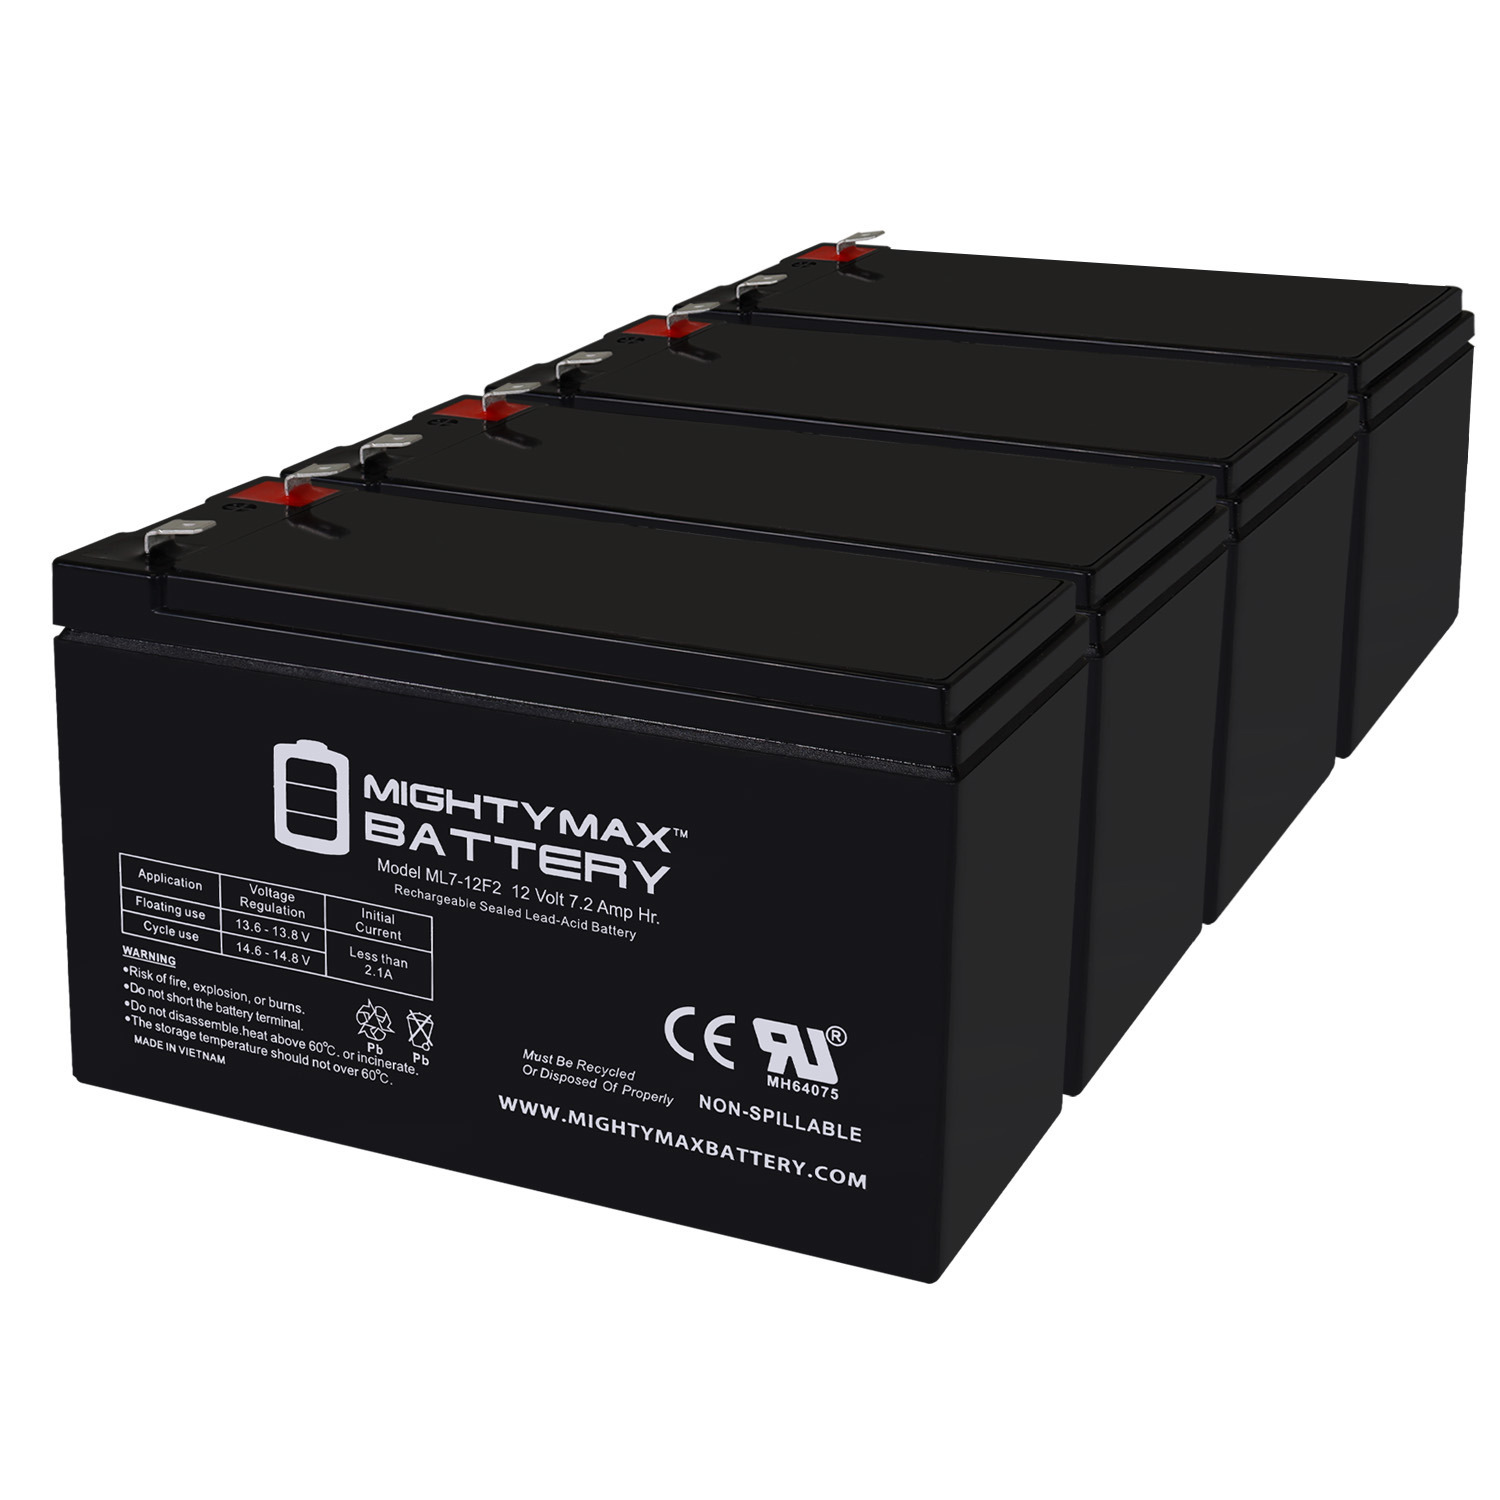 12V 7Ah F2 Replacement Battery for Merida PC500 Scooter - 4 Pack